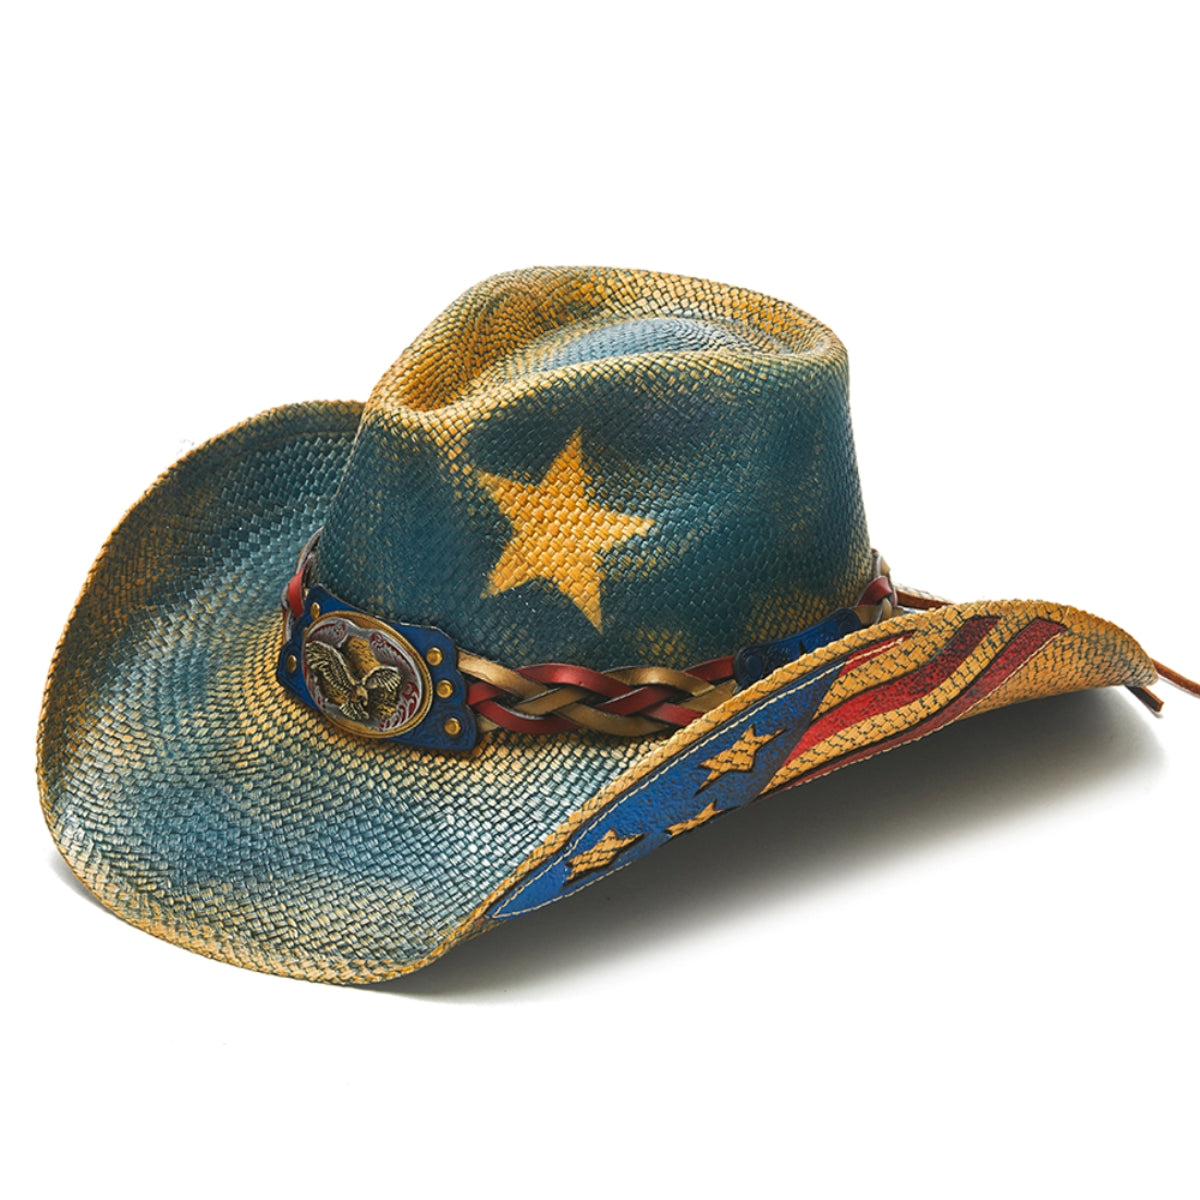 Distressed Look Straw Cowboy Hat with Flag Print